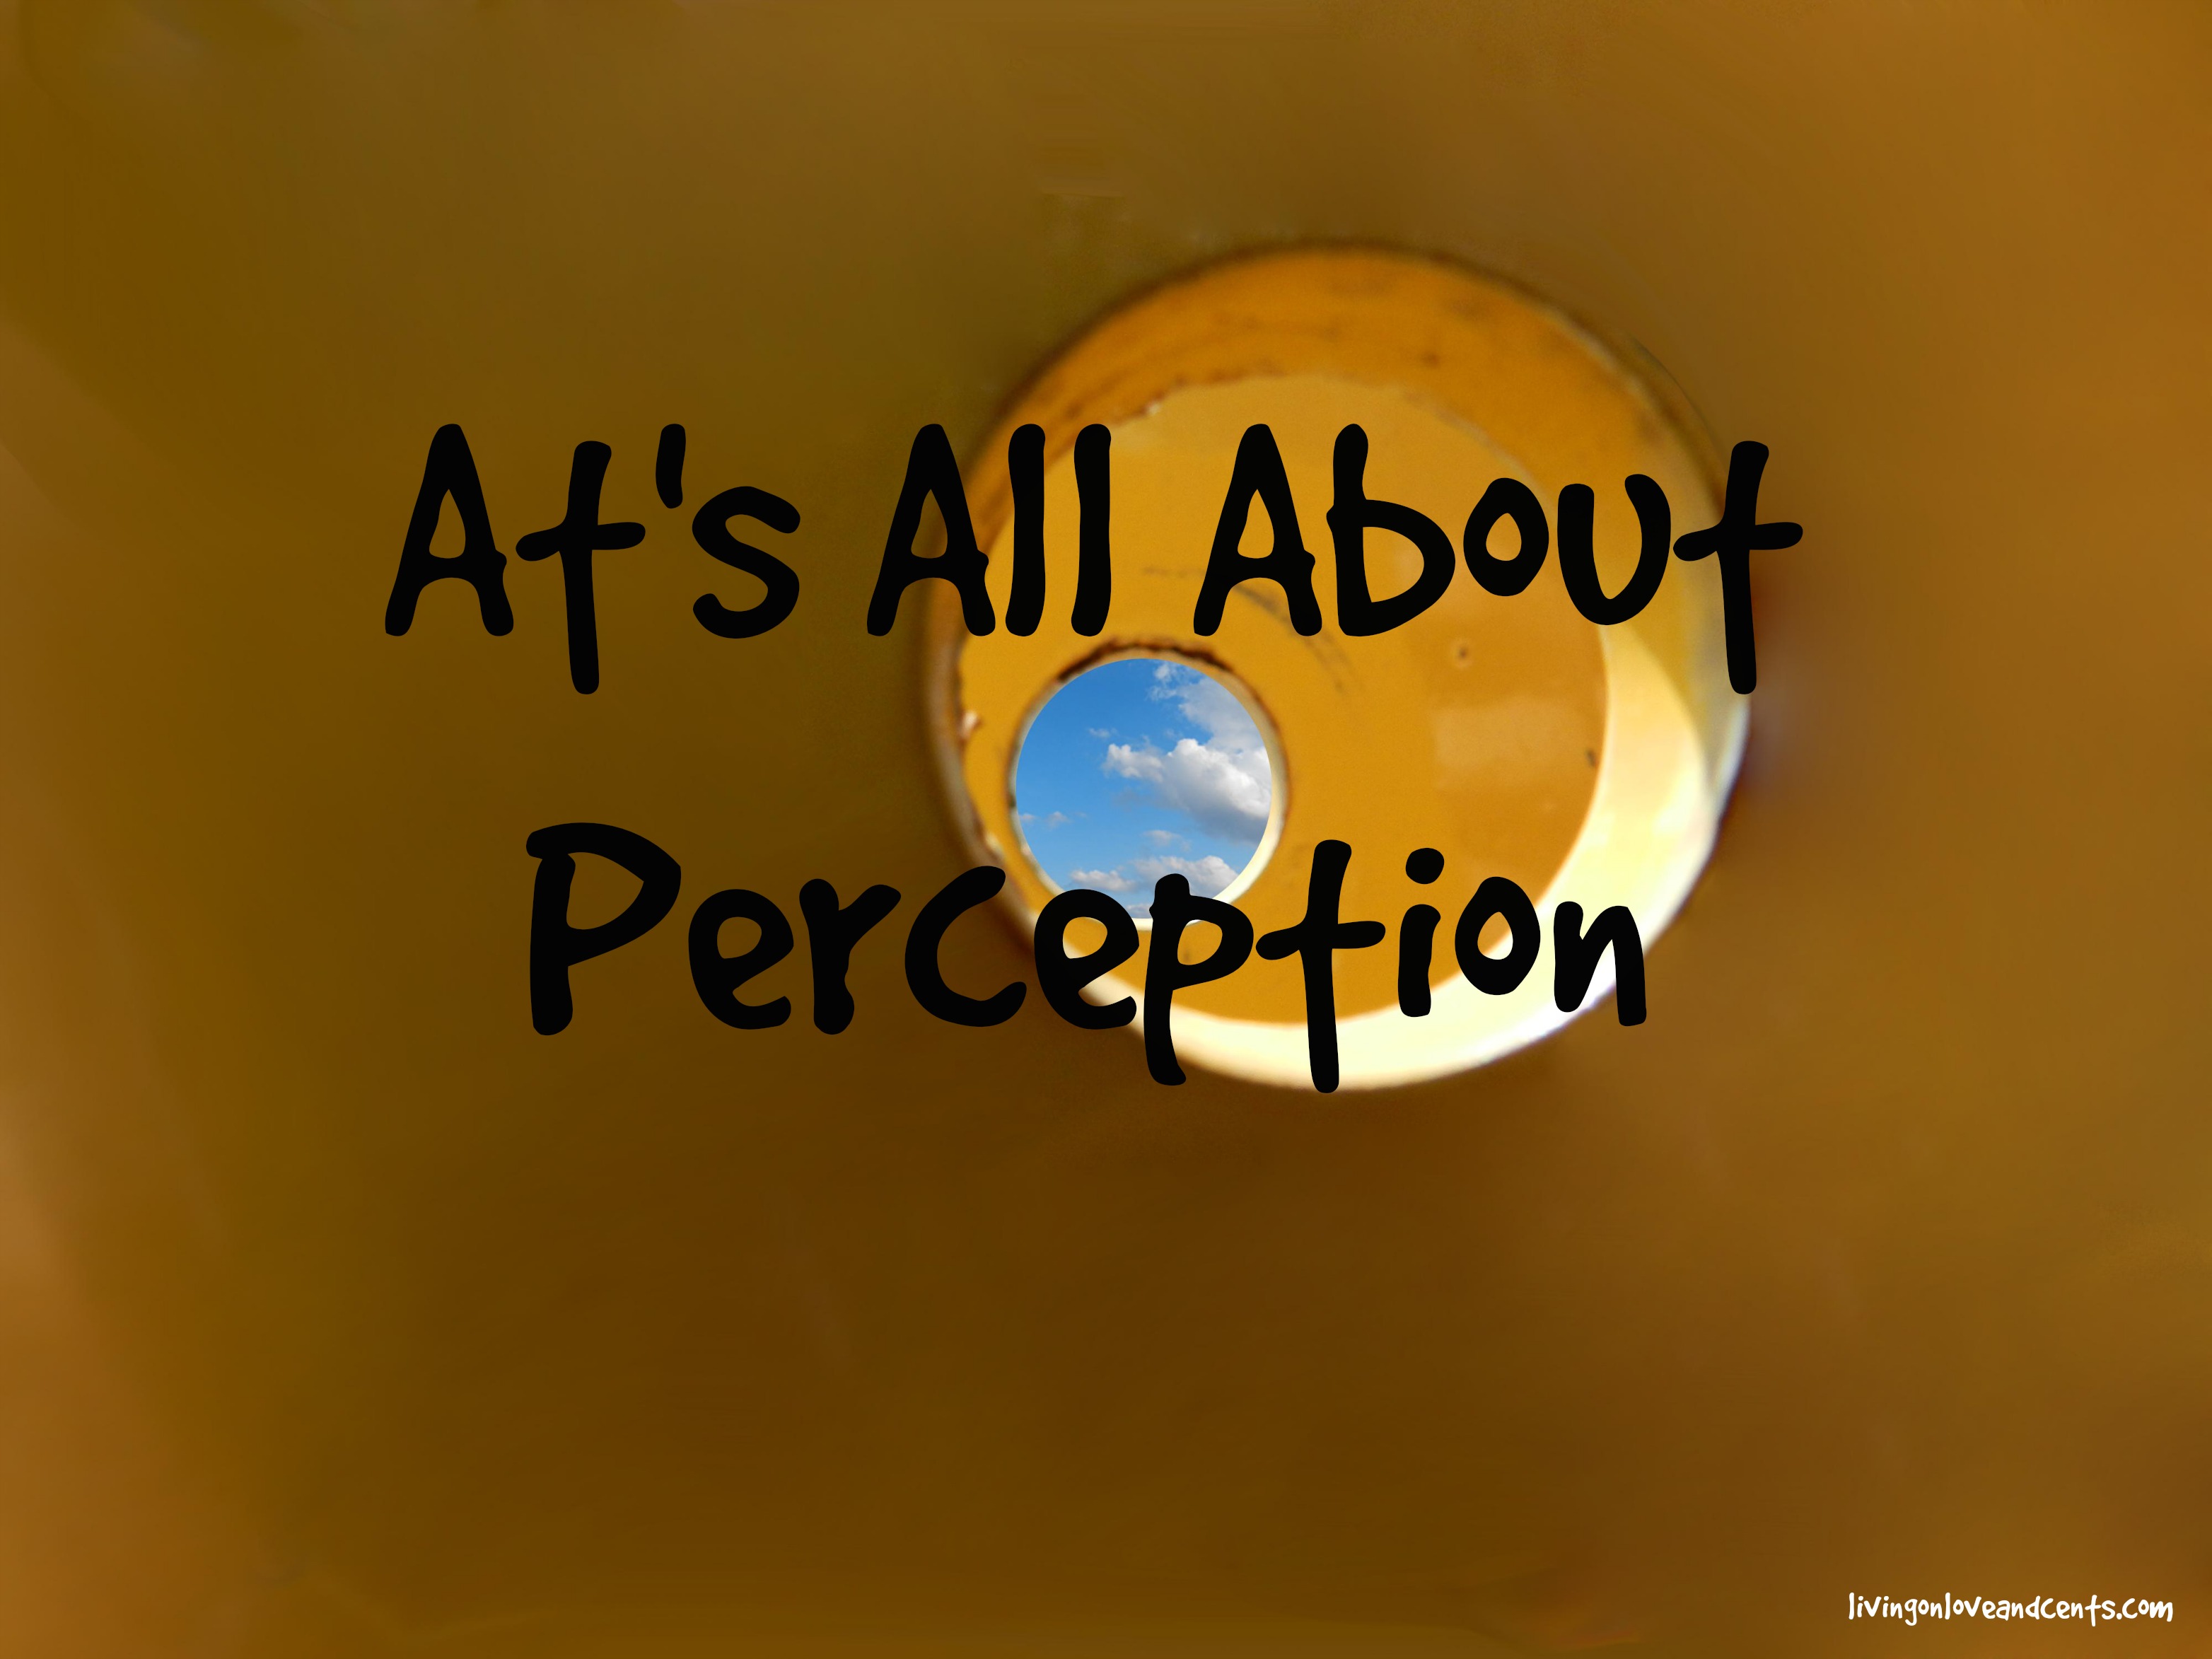 At’s All About Perception